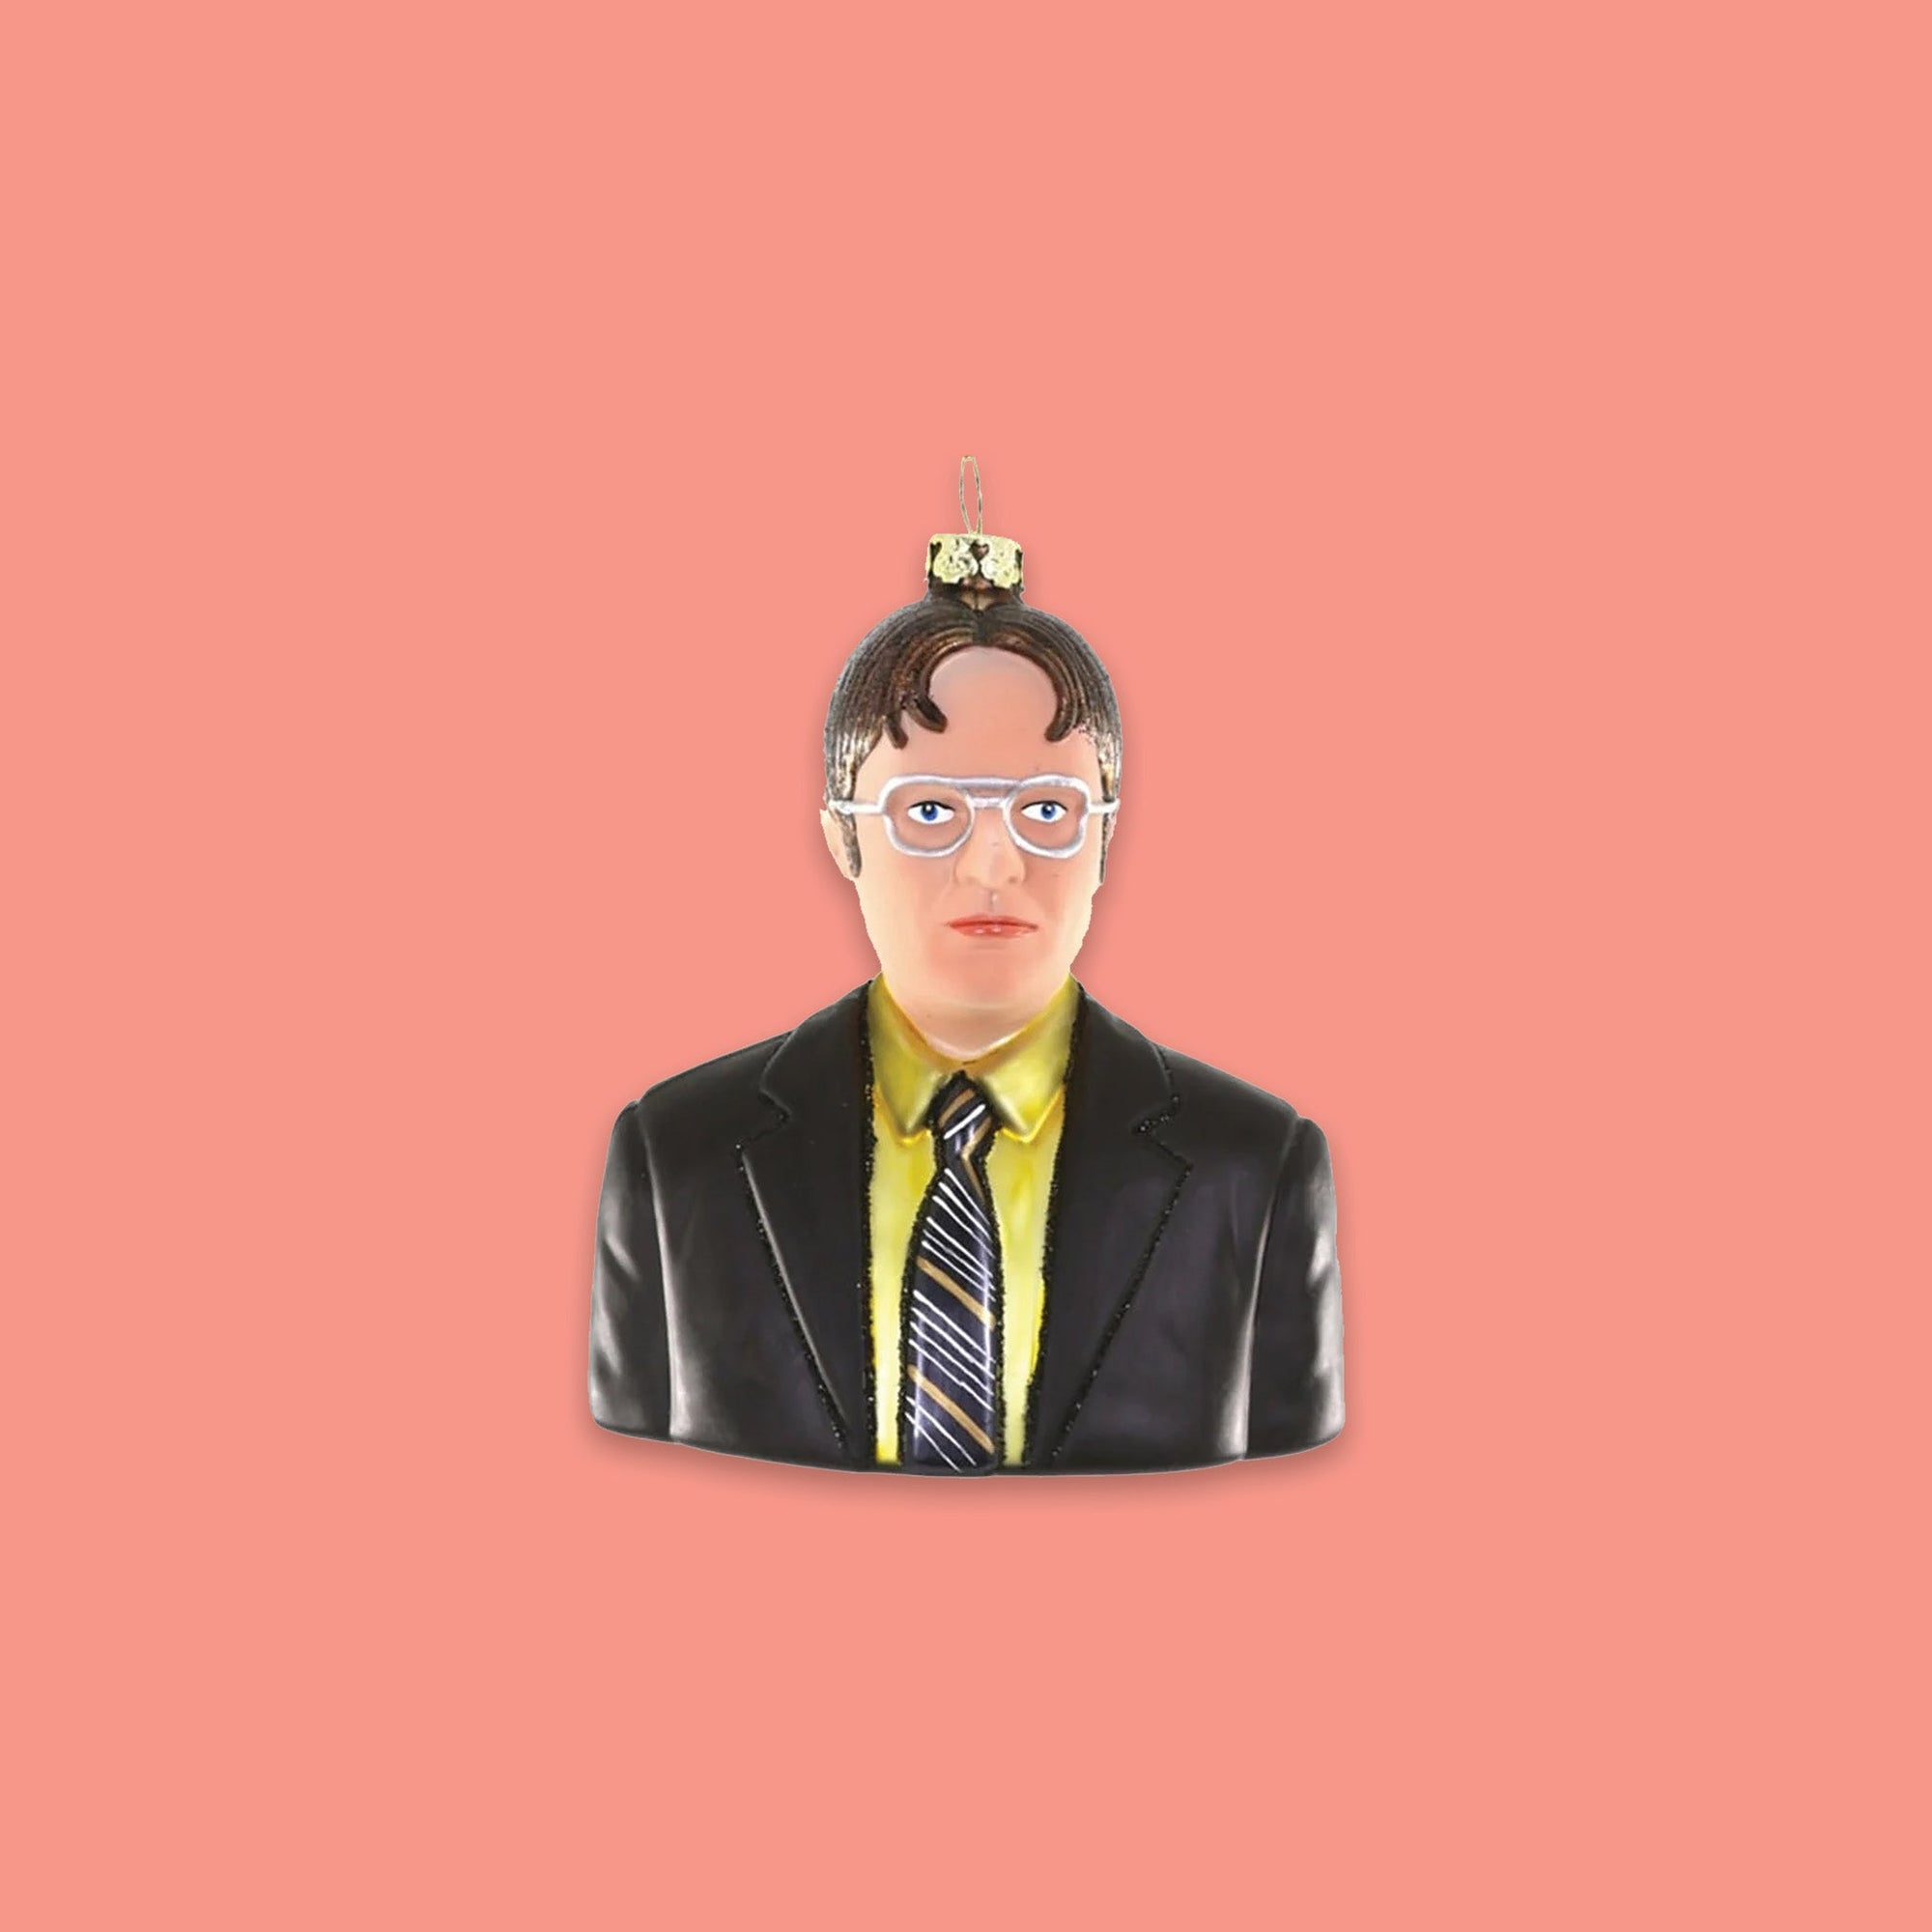 On a coral pink background sits an ornament. The Office inspired glass ornament is a bust of Dwight Schrute wearing a yellow shirt, a tie, and a jacket. He has on silver glasses.